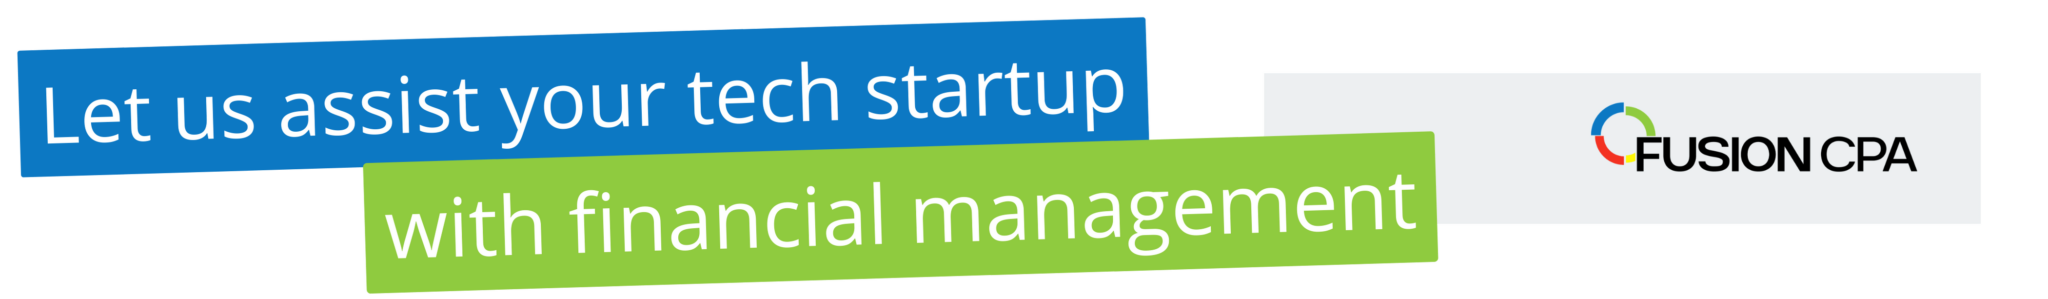 Chat-to-a-Fusion-CPA-about-tech-startup-financial-management